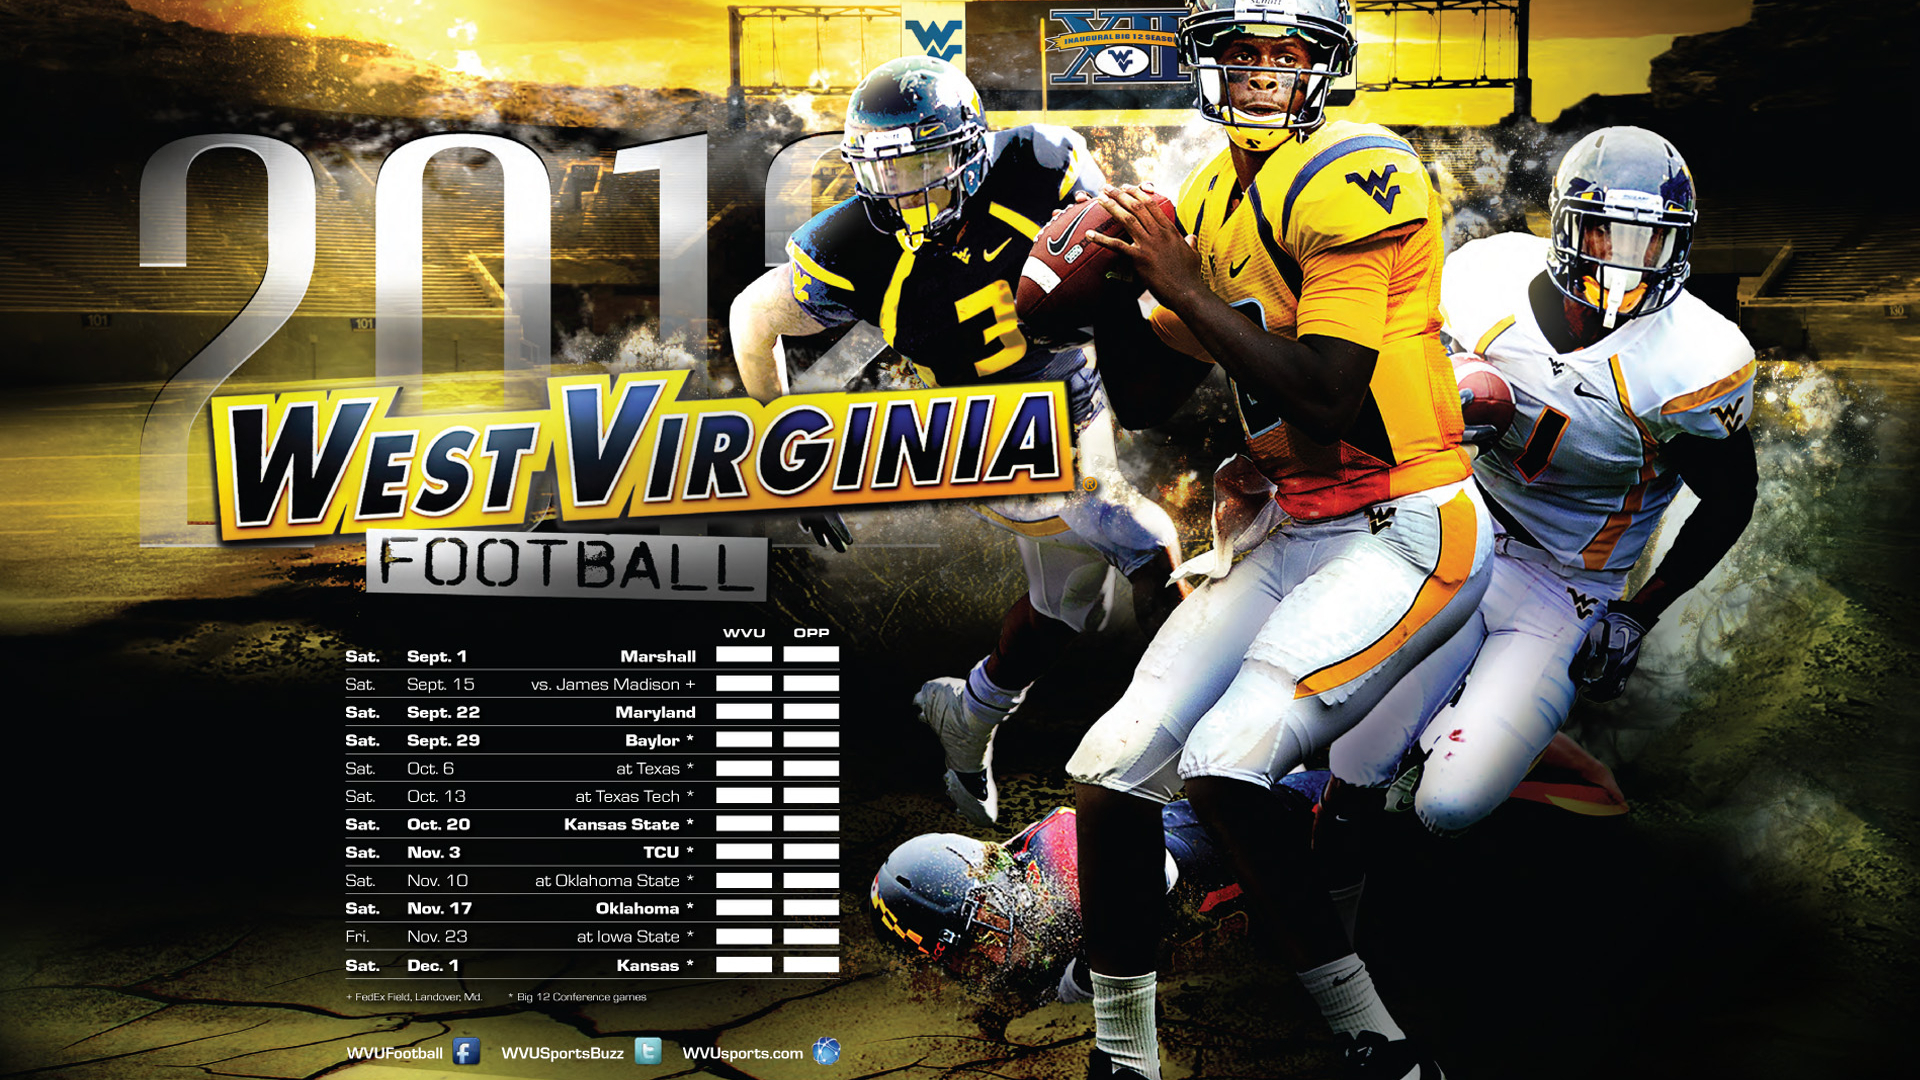 1920x1080 Free download Lets go Mountaineers totally me Pinterest [1920x1200] for your Desktop, Mobile \u0026 Tablet | Explore 47+ WVU Football Wallpapers | WVU Wallpaper Pics, WVU iPhone Wallpaper, WVU Football Desktop Wallpaper